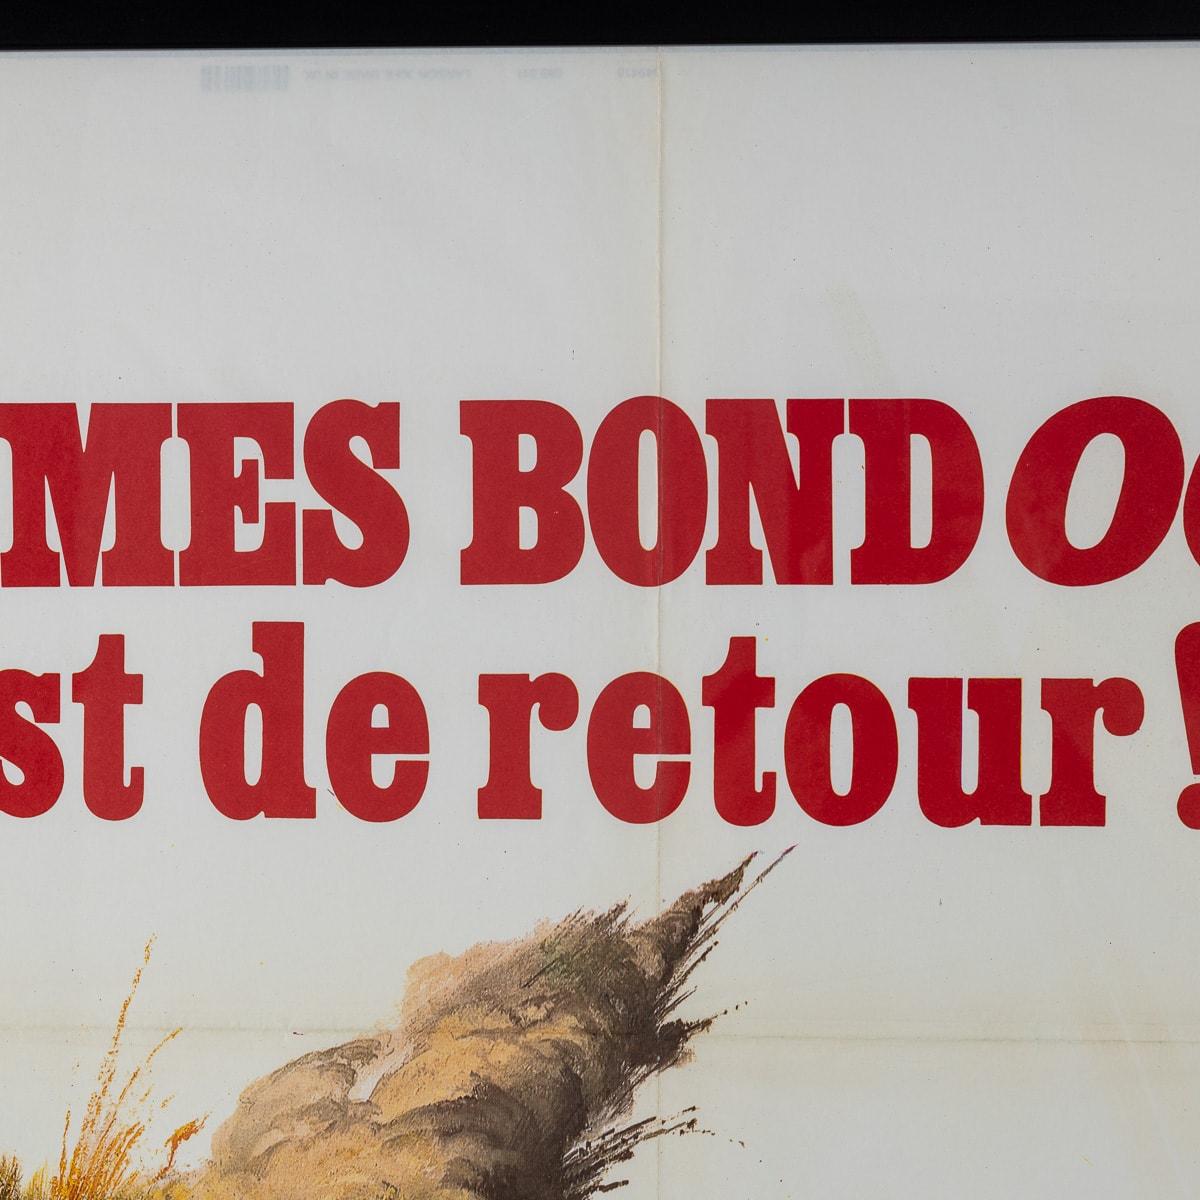 Other French Release James Bond 007 'On Her Majesty's Secret Service' Poster c.1969 For Sale